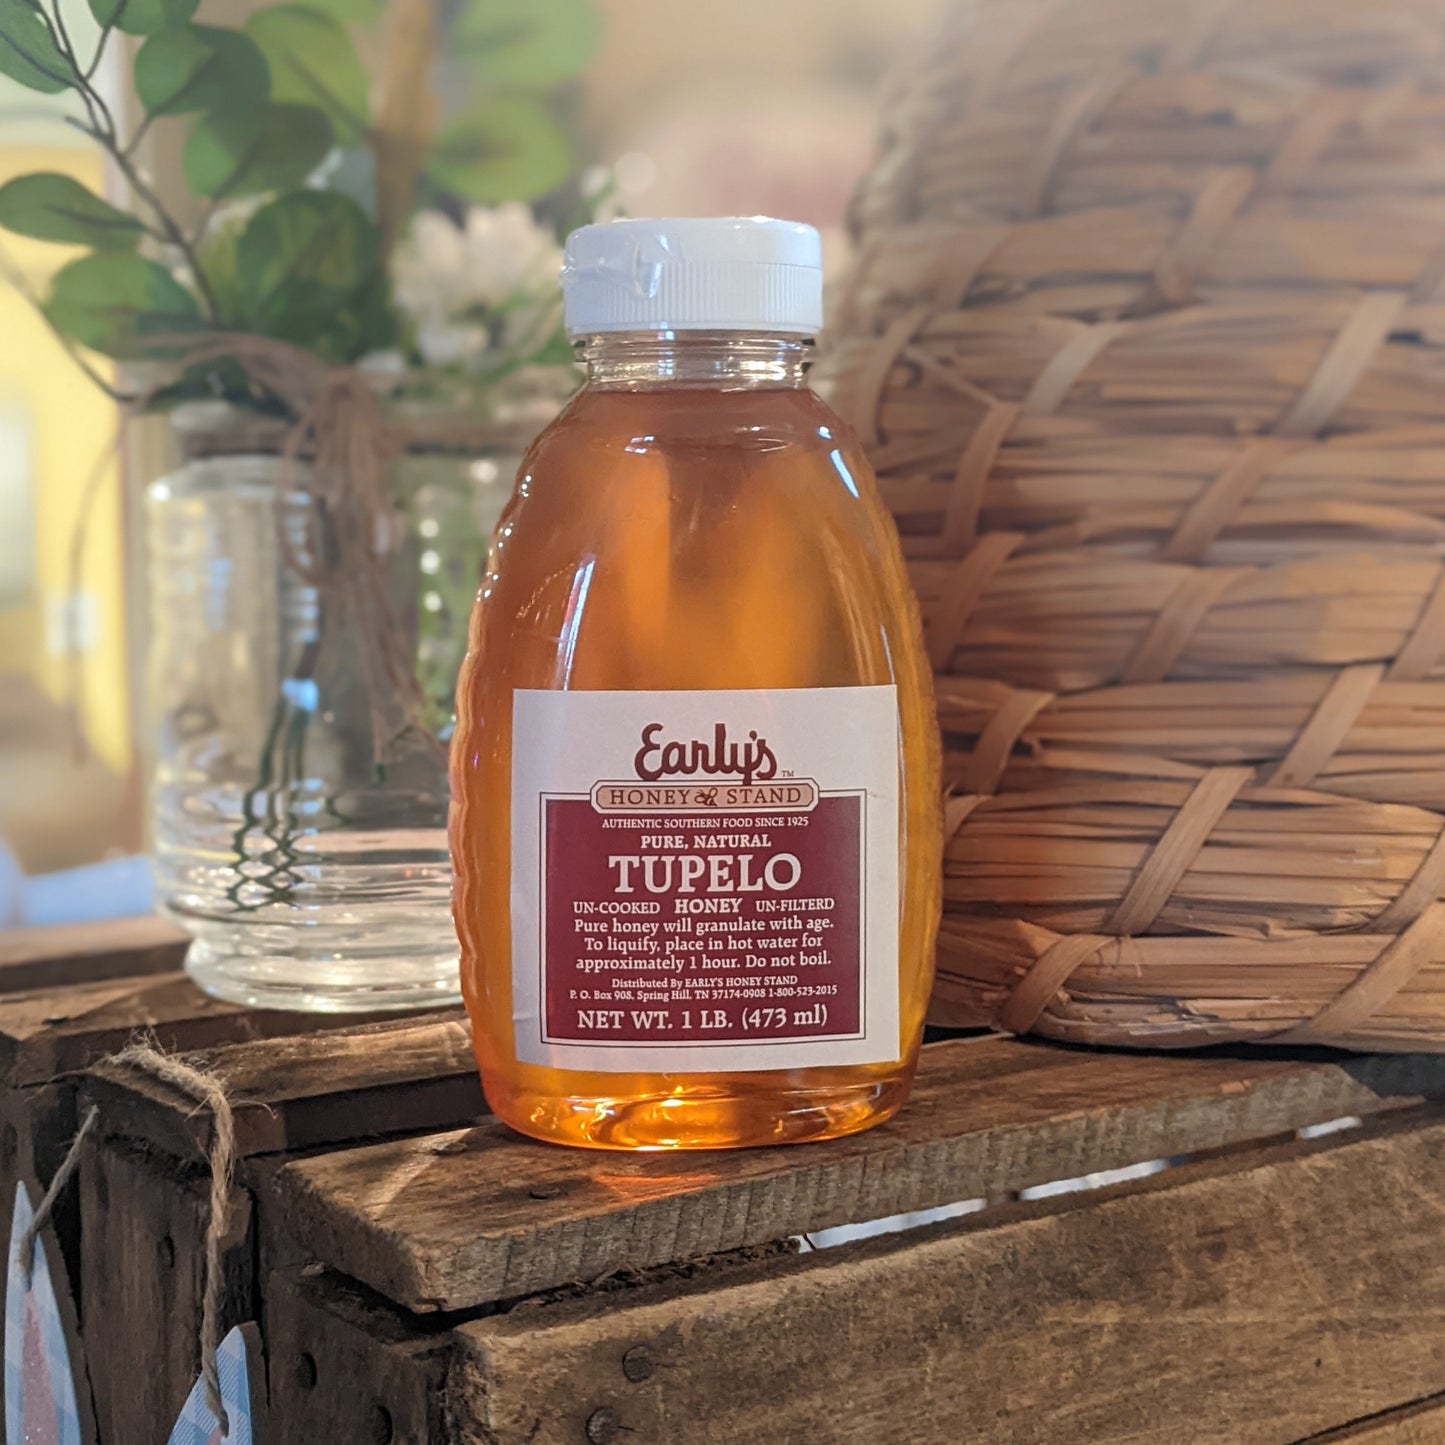 A clear plastic squeeze bottle with a bright yellow label, filled with golden-colored honey. The label features the Early's Honey Stand logo and text reading "100% Pure Tupelo Honey." The bottle is resting on a wooden table against a blurred background of honeycomb cells and a jar of honey.